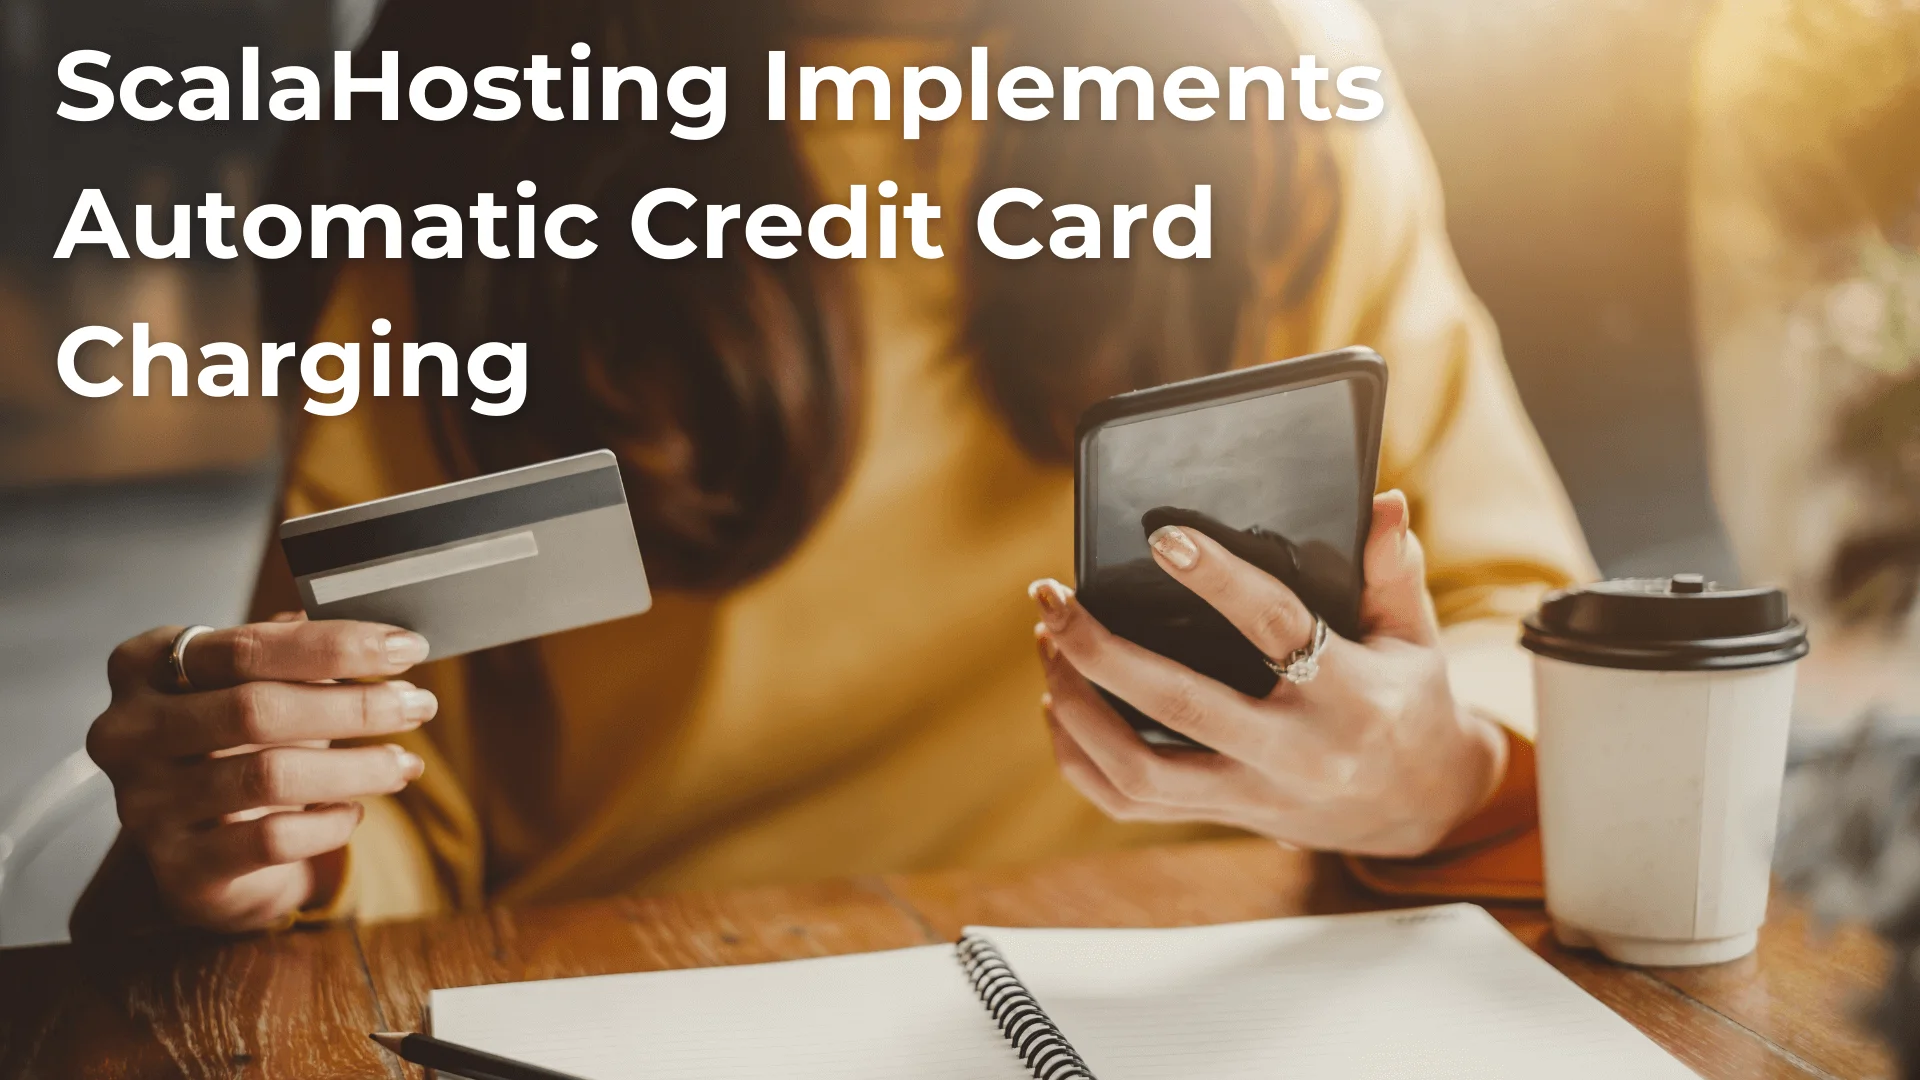 ScalaHosting Implements Automatic Credit Card Charging